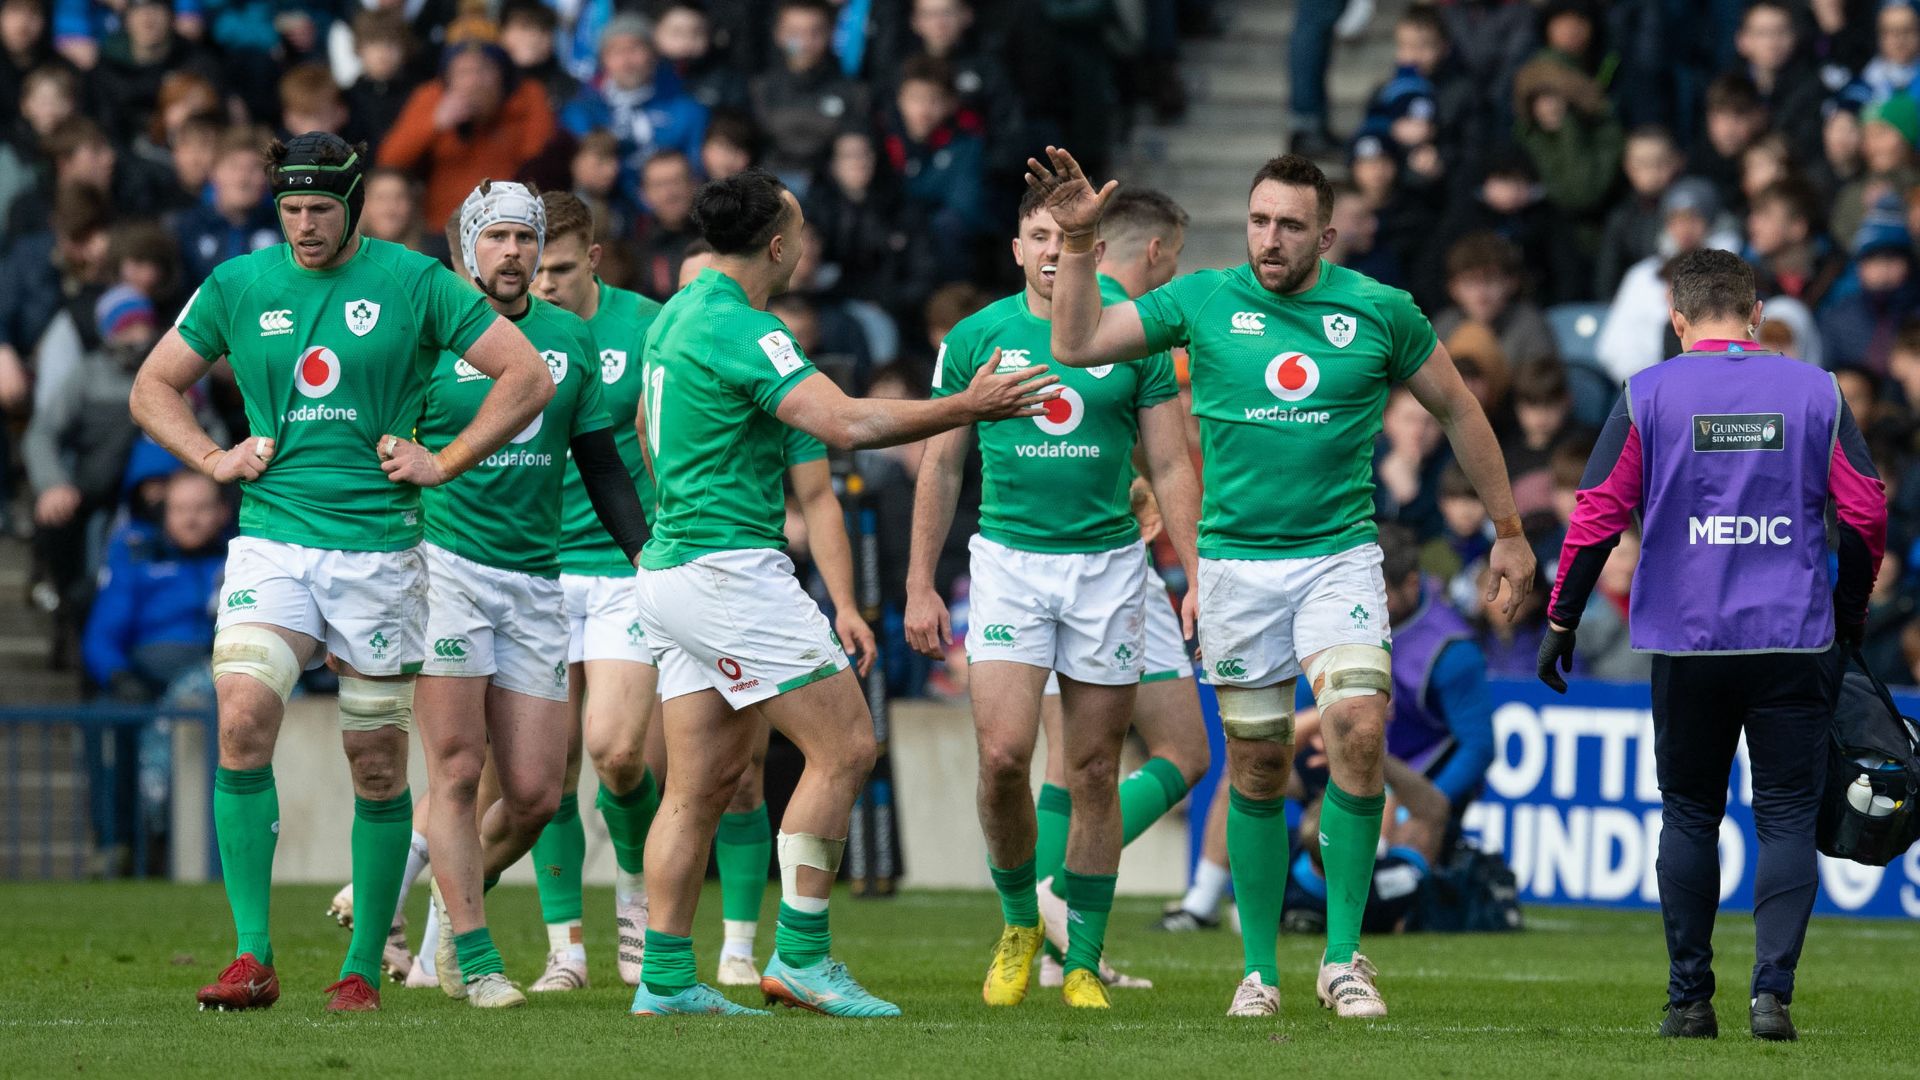 Ireland digs deep to move within one win of Grand Slam